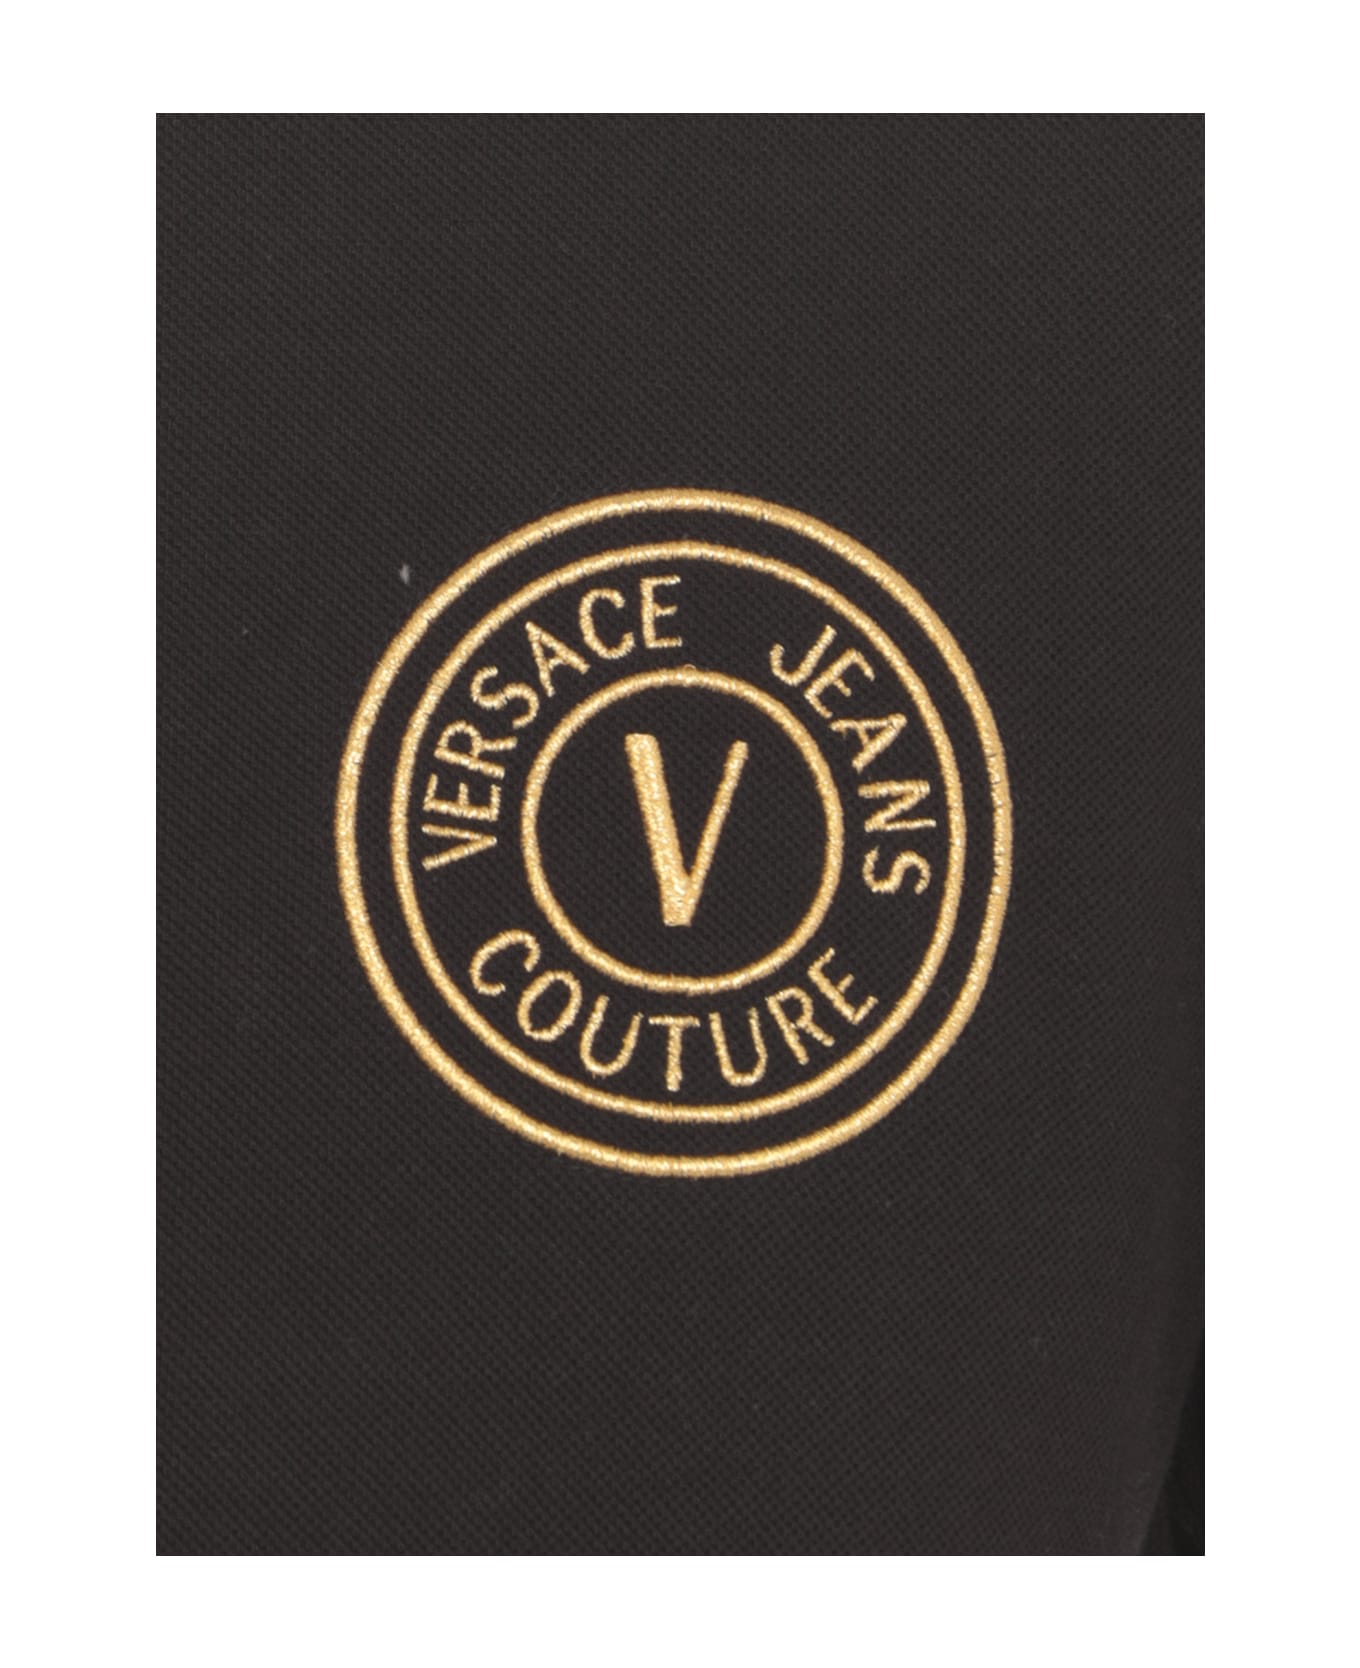 Versace Jeans Couture Logoed Polo Shirt - Black